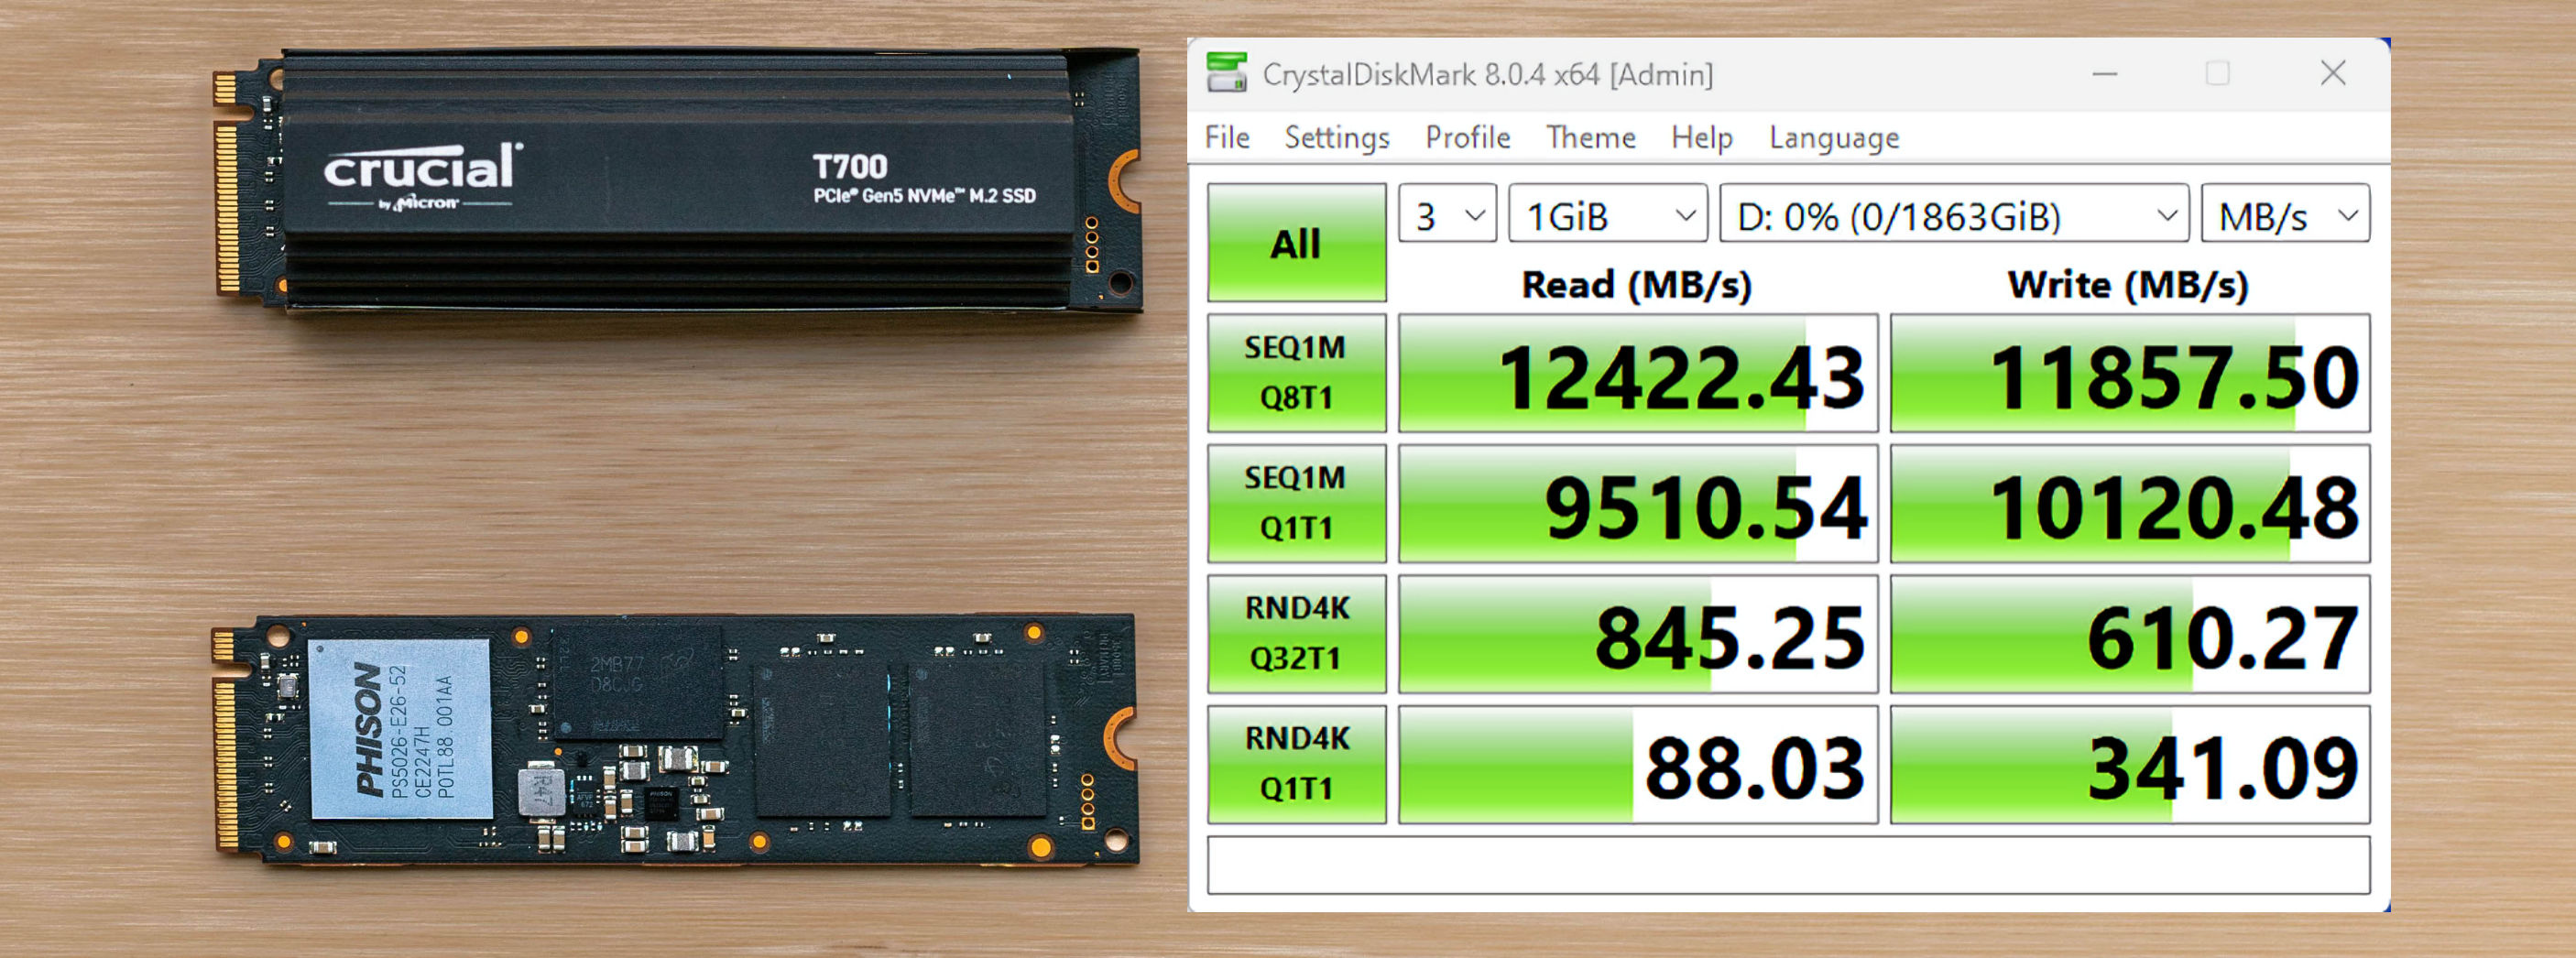 Crucial T700 PCIe Gen5 NVMe SSD teased reaching 12.4 GB/s read and 11.9  GB/s write speeds 